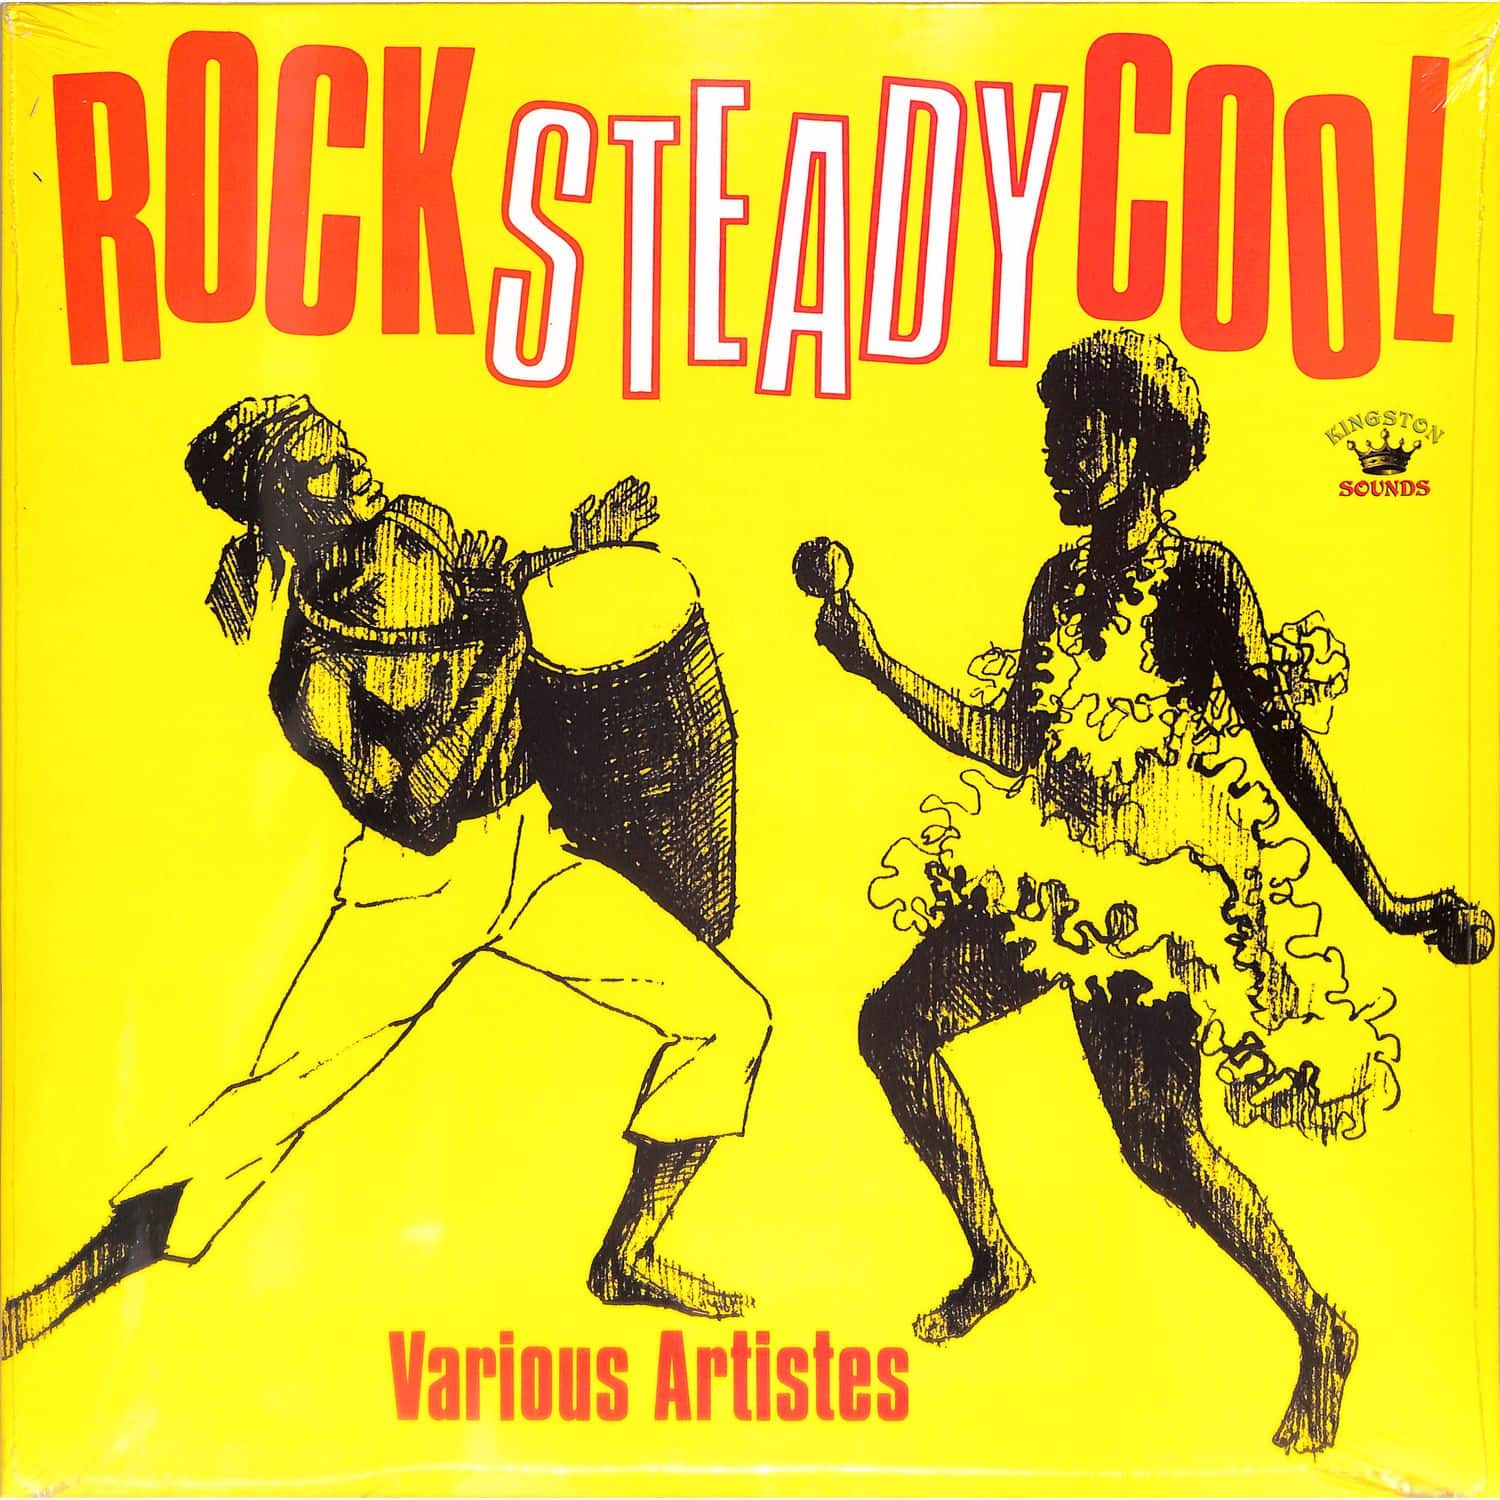 Various Artists - ROCK STEADY COOL 